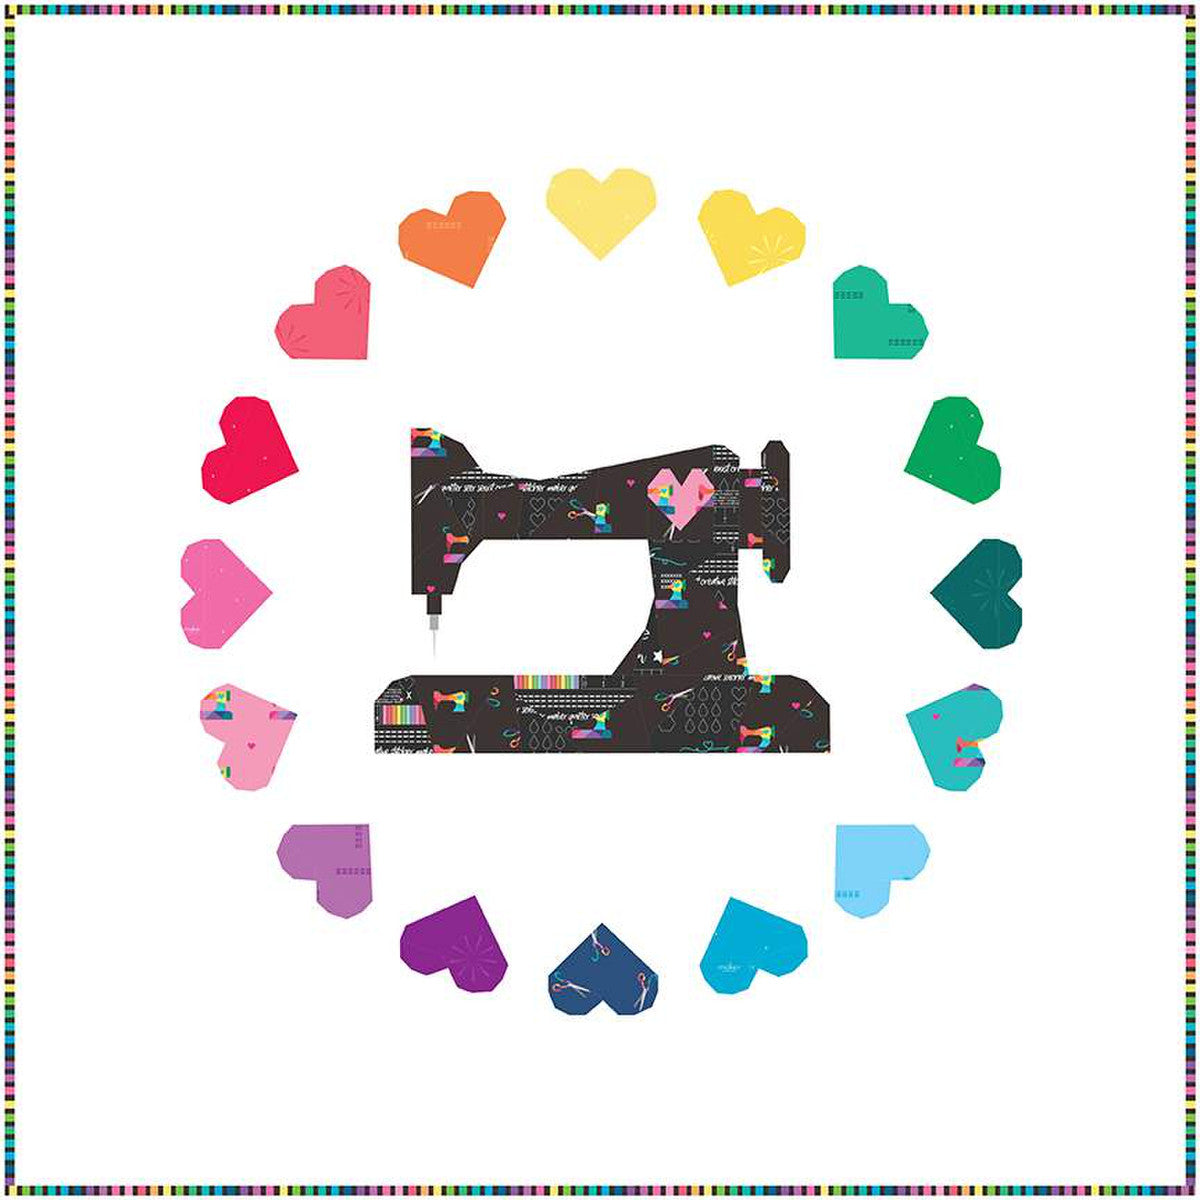 Kristy Lea Quiet Play Just Sew Quilt Pattern wall hanging rainbow hearts sewing machine foundation paper piecing quilters sewers 